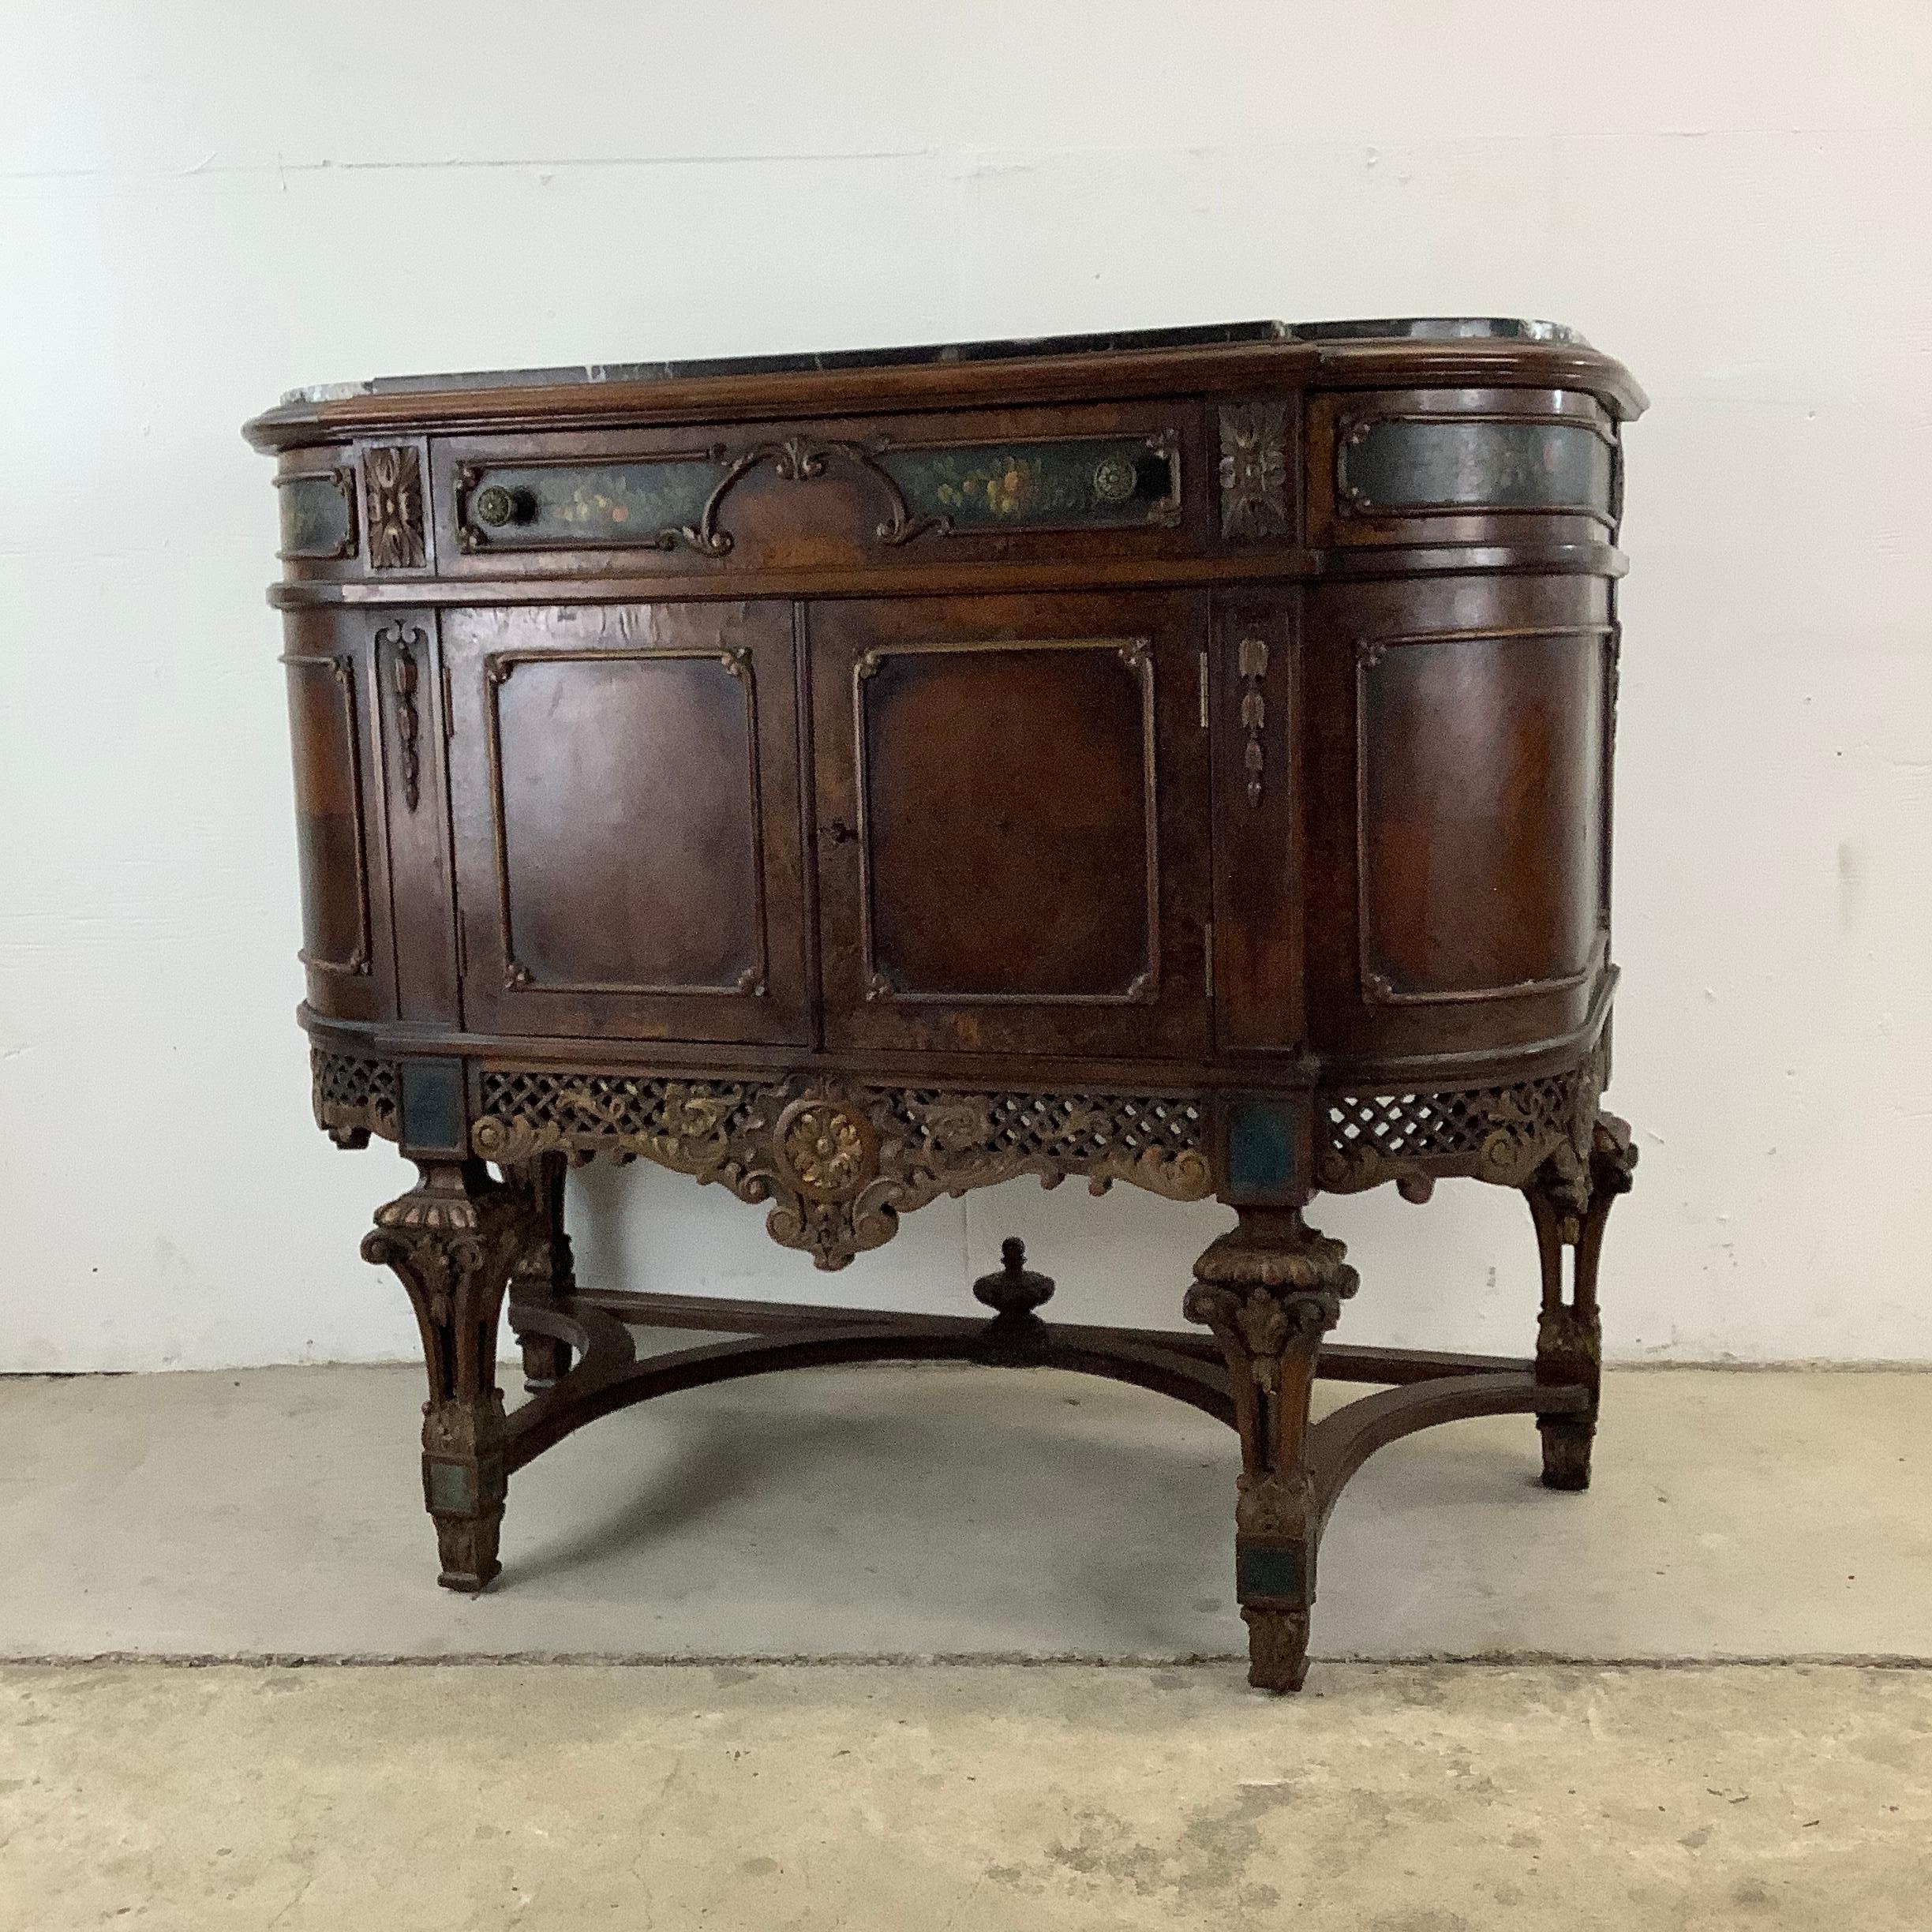 Embellish your space with this antique Jacobean-style marble top buffet sideboard. This exquisite piece, adorned with painted floral details and ornate wood carvings, is a testament to the opulence and craftsmanship of a bygone era of French